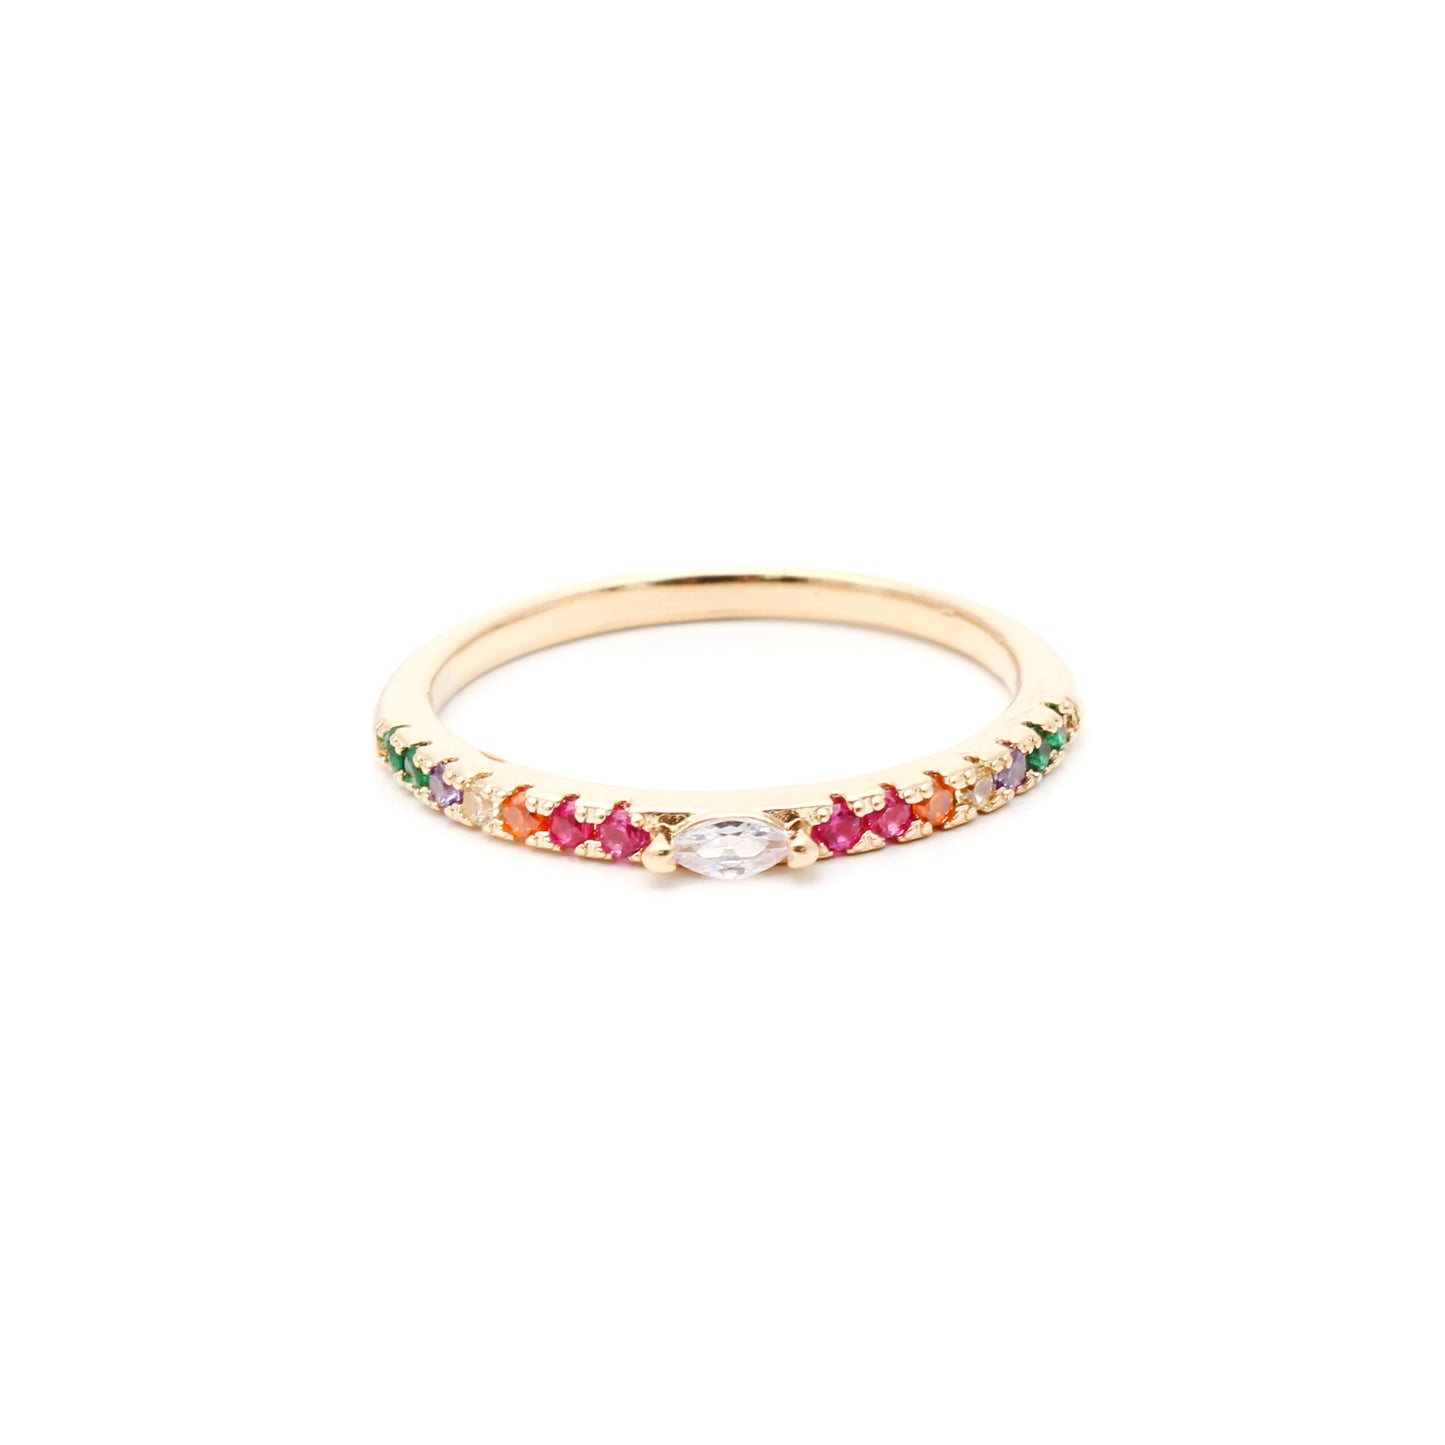 18K gold plated ring set with colored zirconia